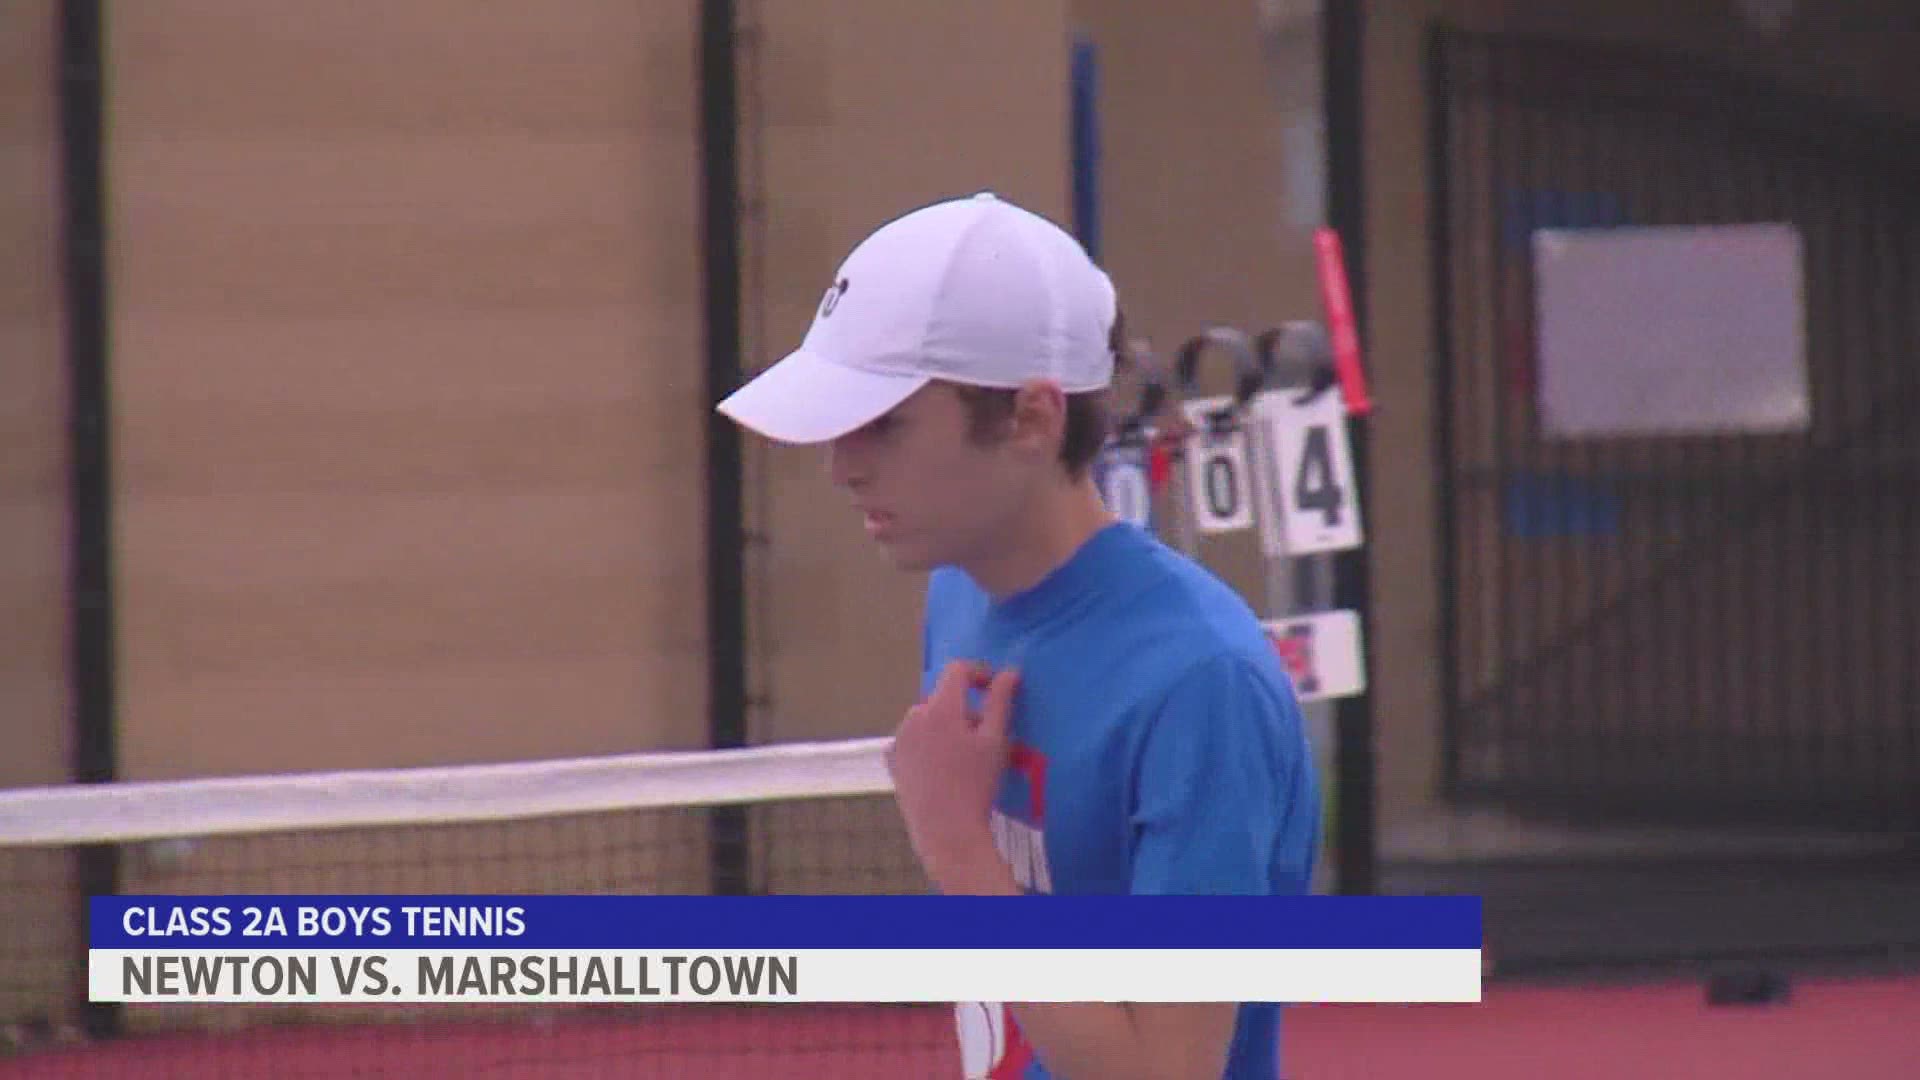 The Marshalltown Bobcats took care of business with an 11-0 win over Newton on Friday